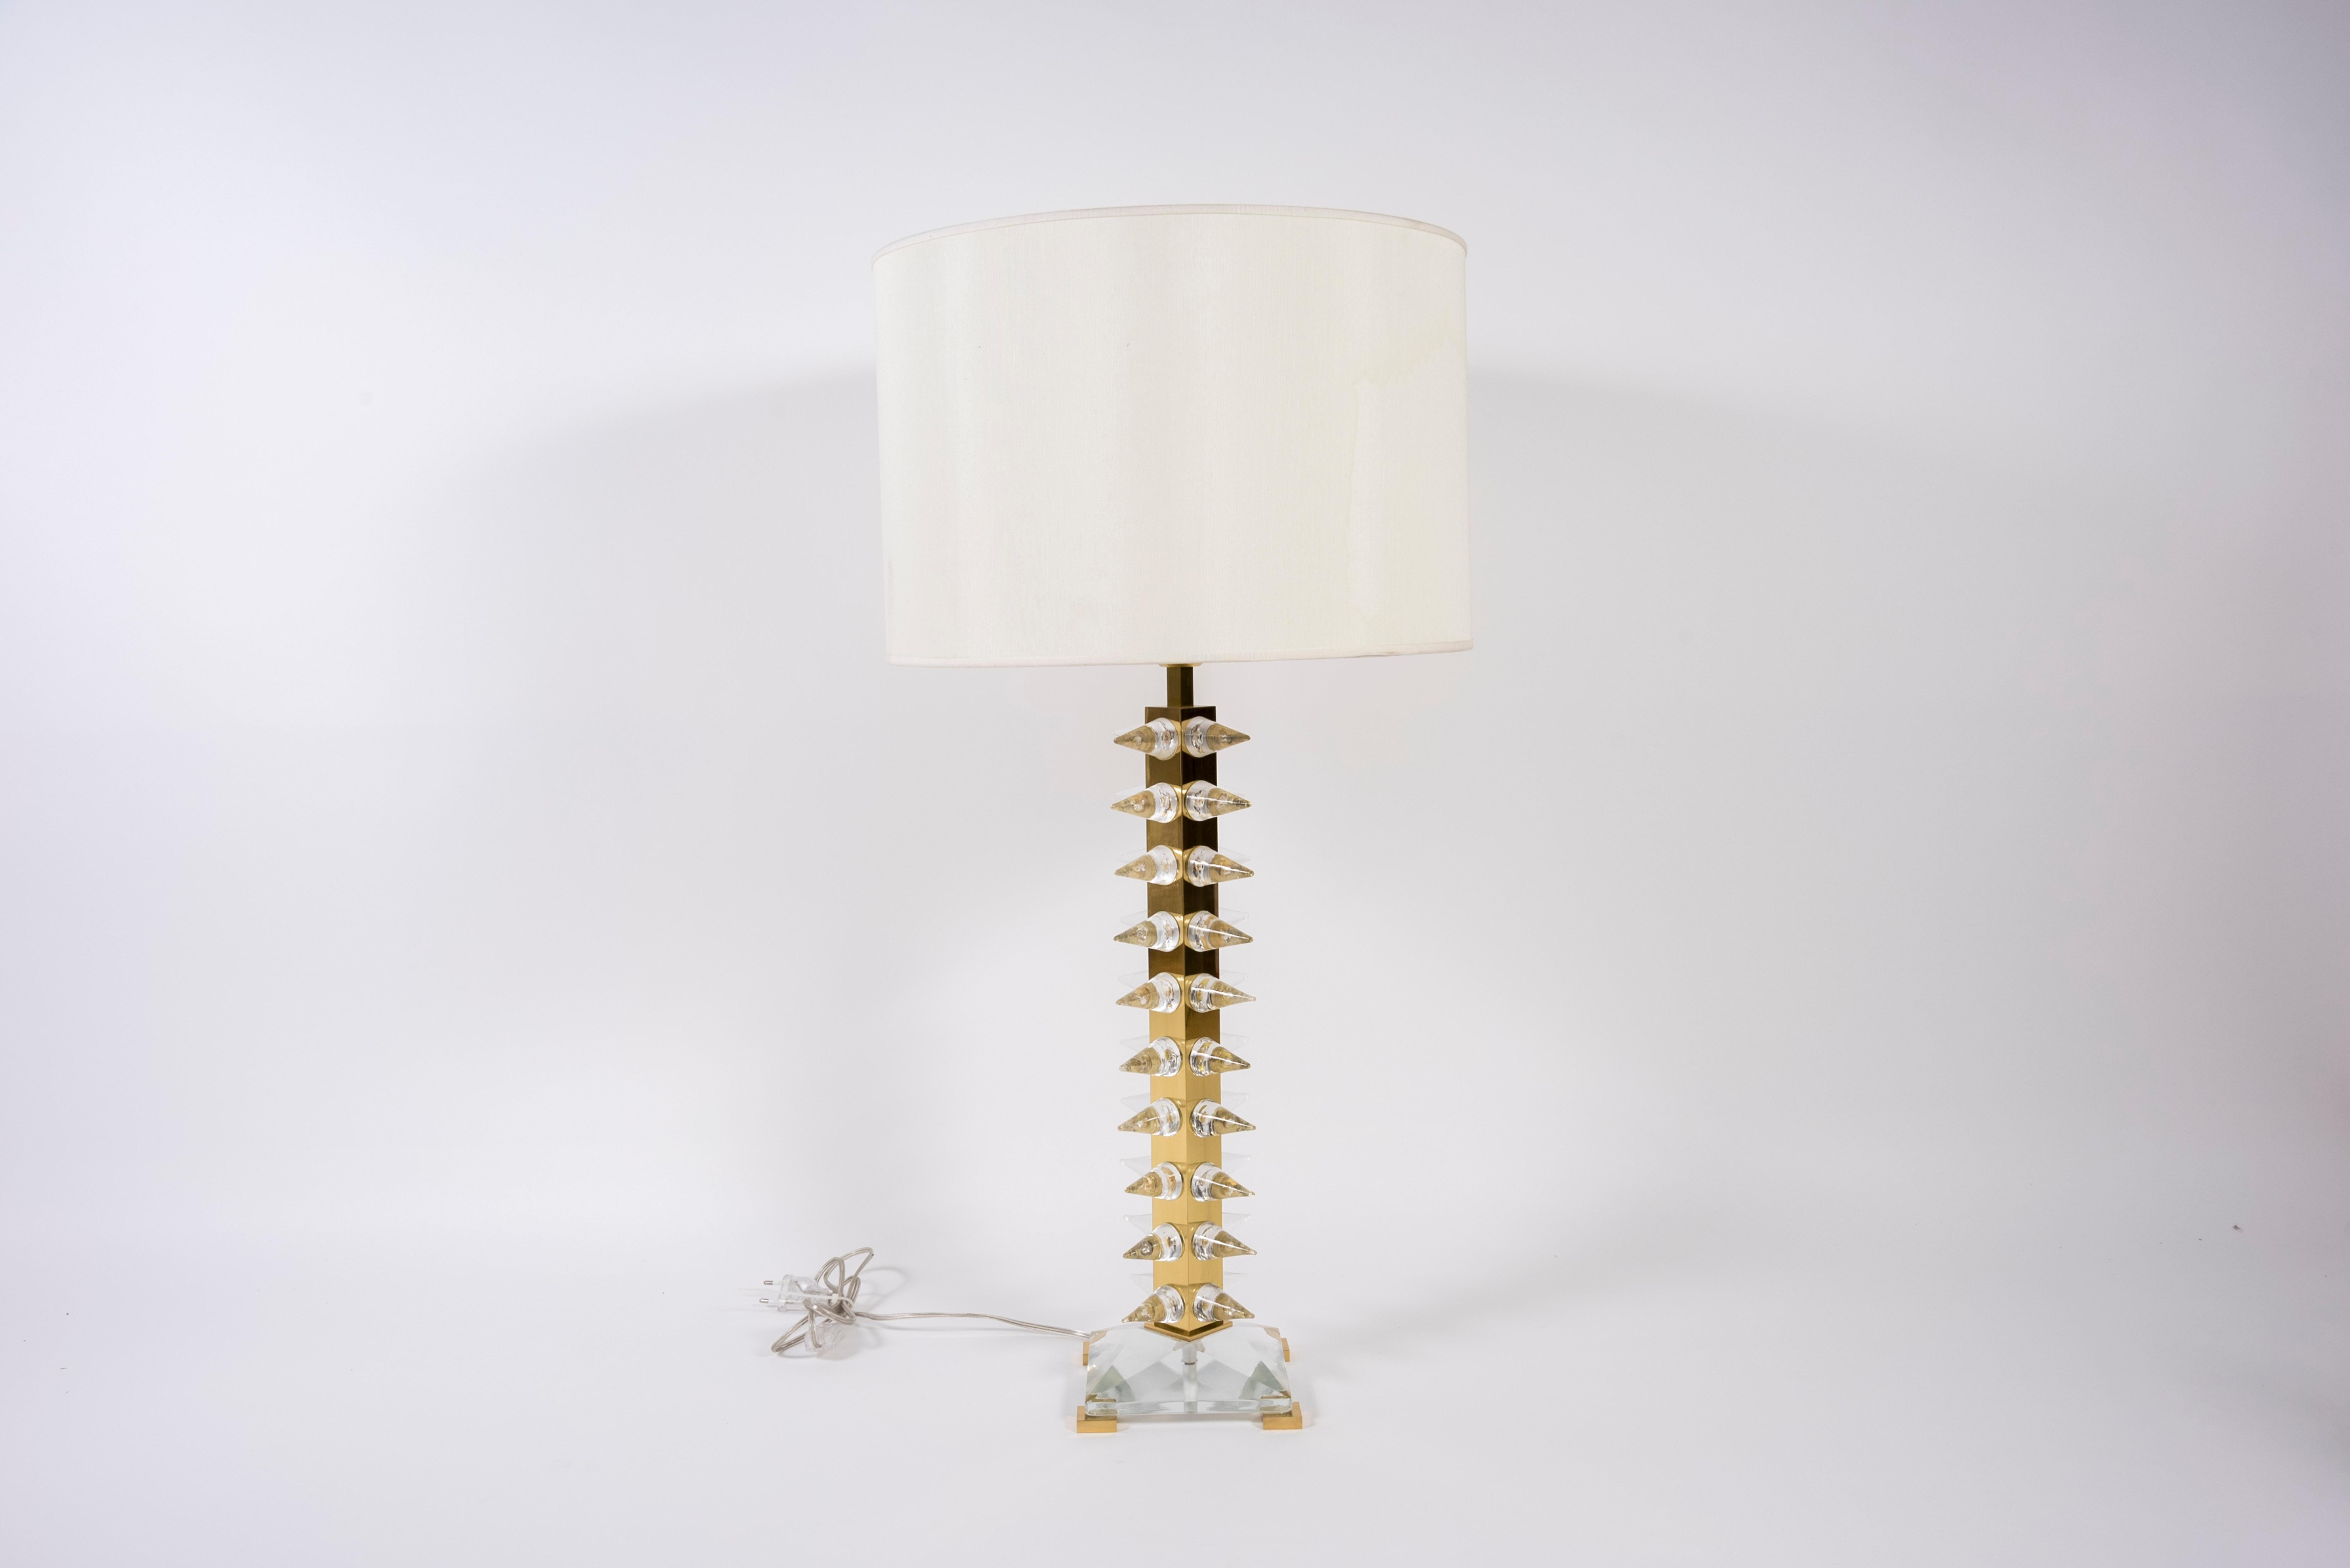 Pair of Contemporary Cristal table lamps
No Shade provided
Dimensions given without shade
